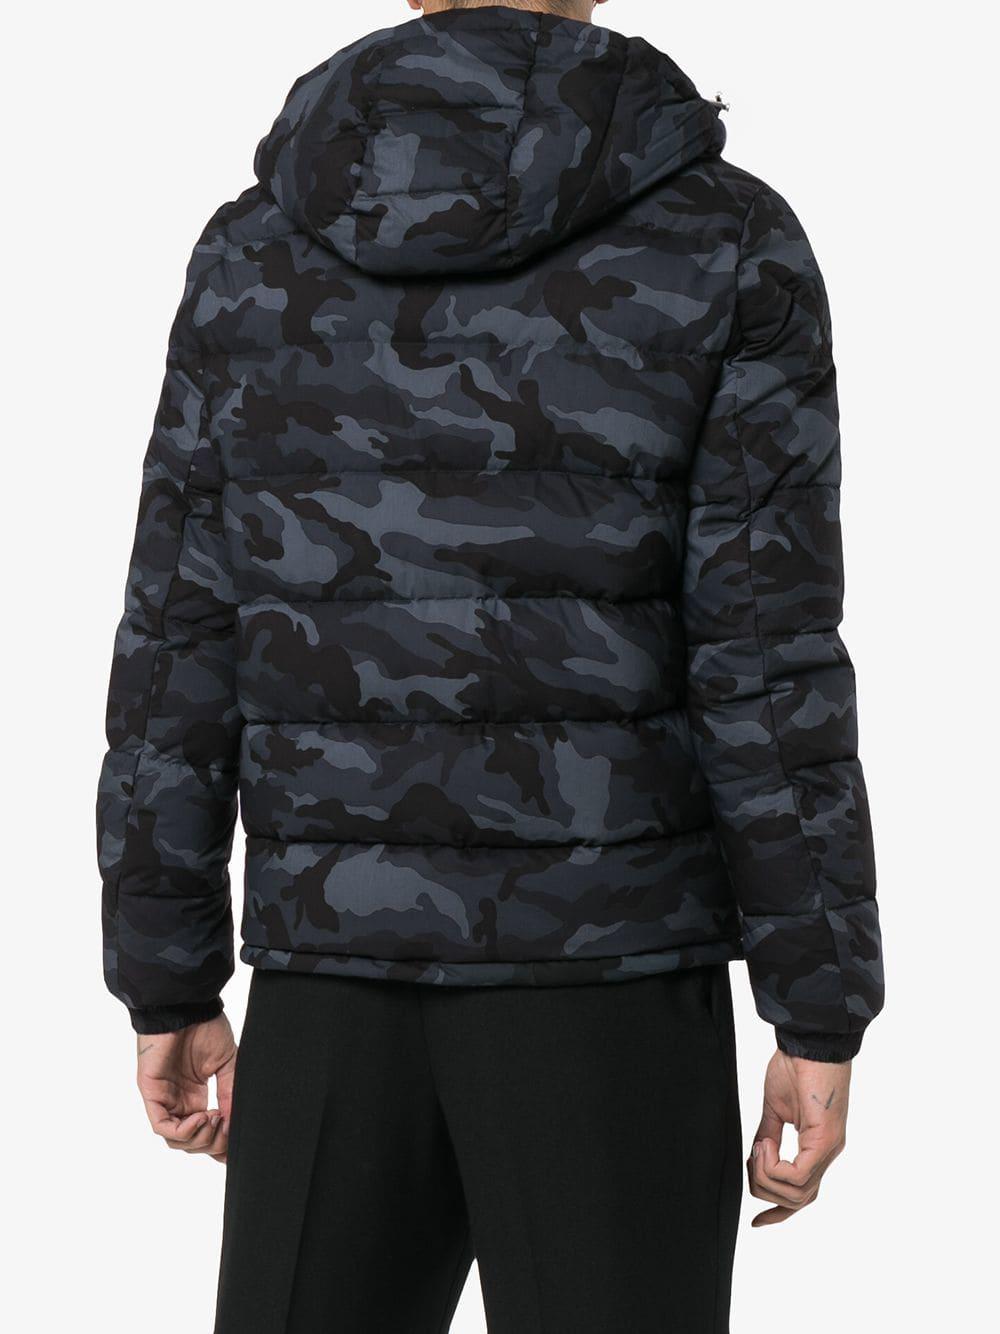 Moncler Cotton Aiton Down-filled Hooded Jacket in Blue for Men - Lyst